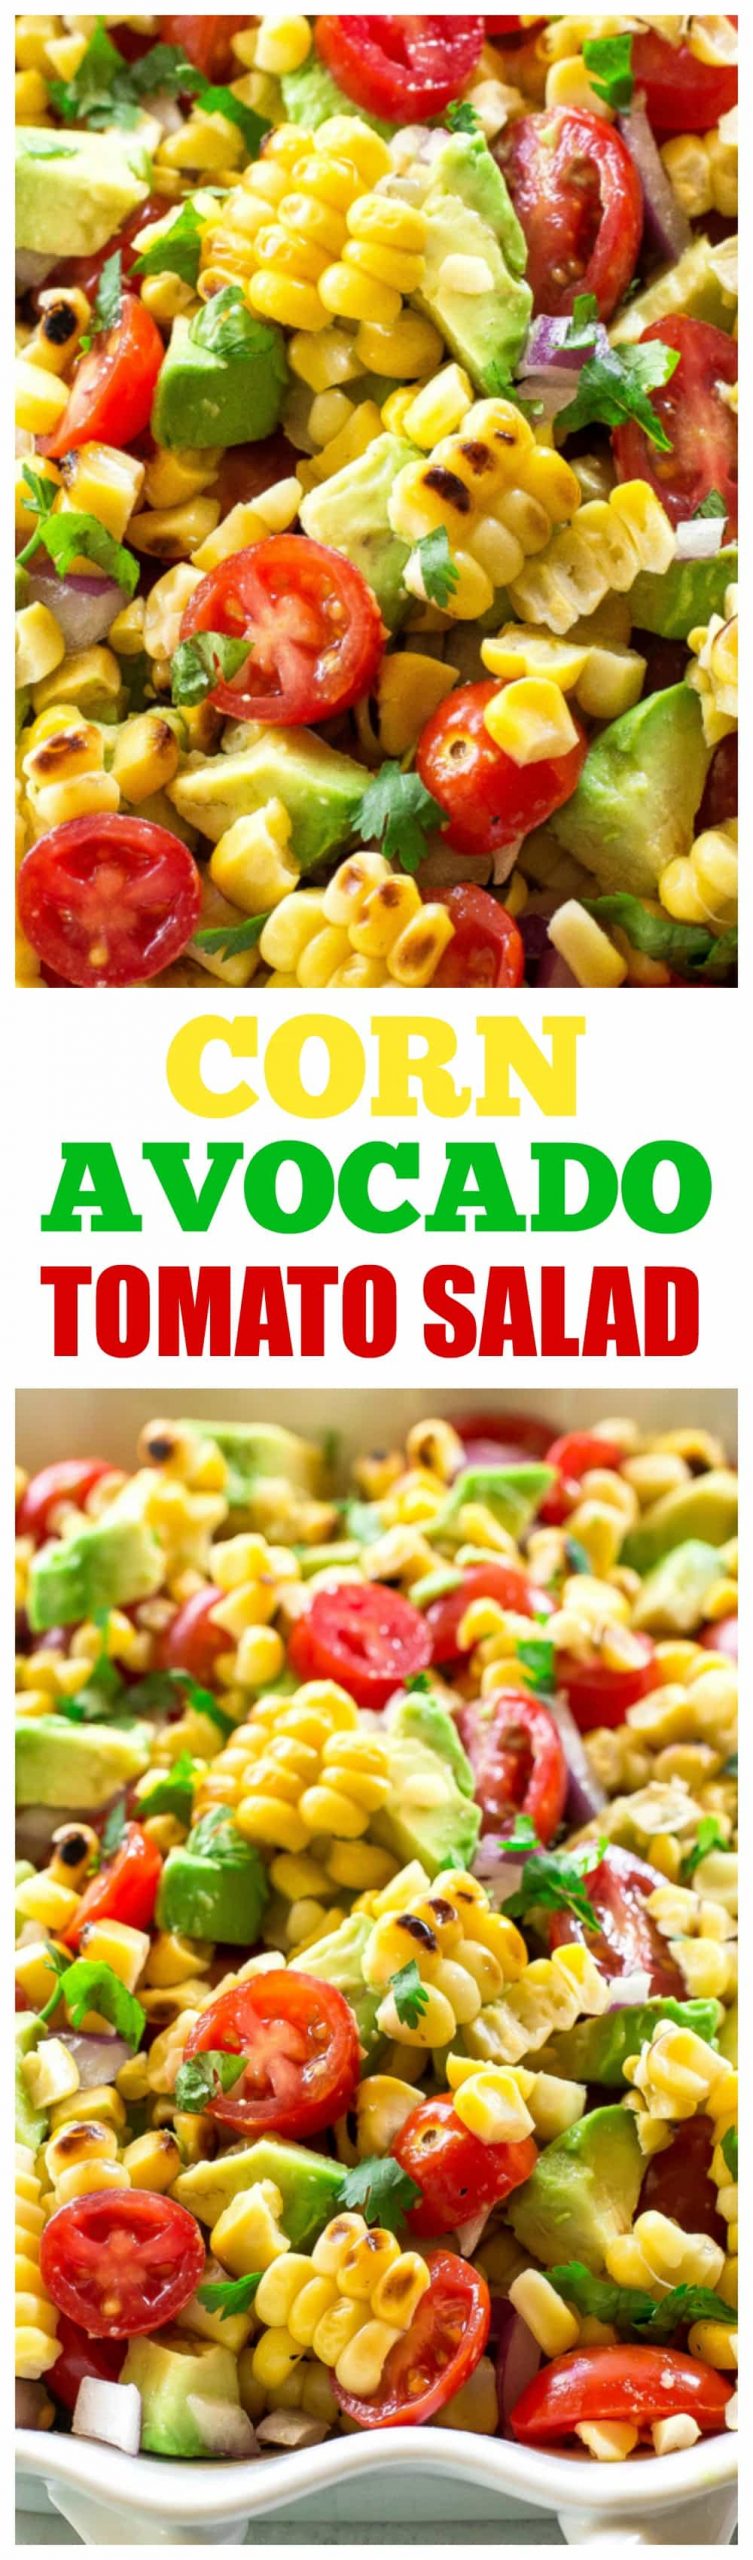 This Corn, Avocado, and Tomato Salad is a fresh and light side dish perfect for summer BBQs and potlucks. It's a fresh and light side dish that screams summer! #summer #potluck #sidedish #salad #corn #BBQ